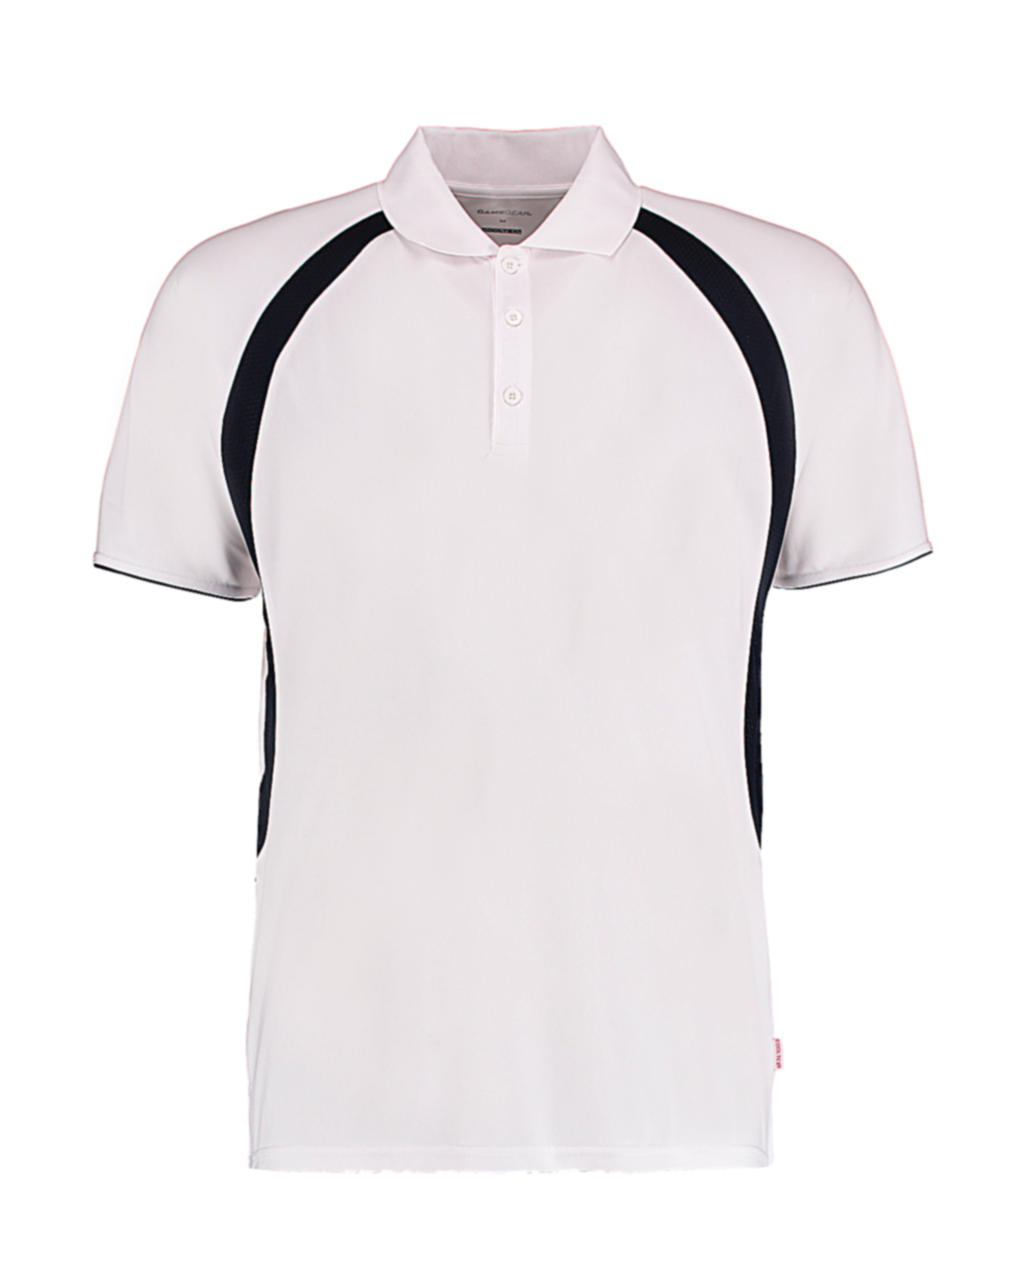  Classic Fit Cooltex? Riviera Polo Shirt in Farbe White/Navy